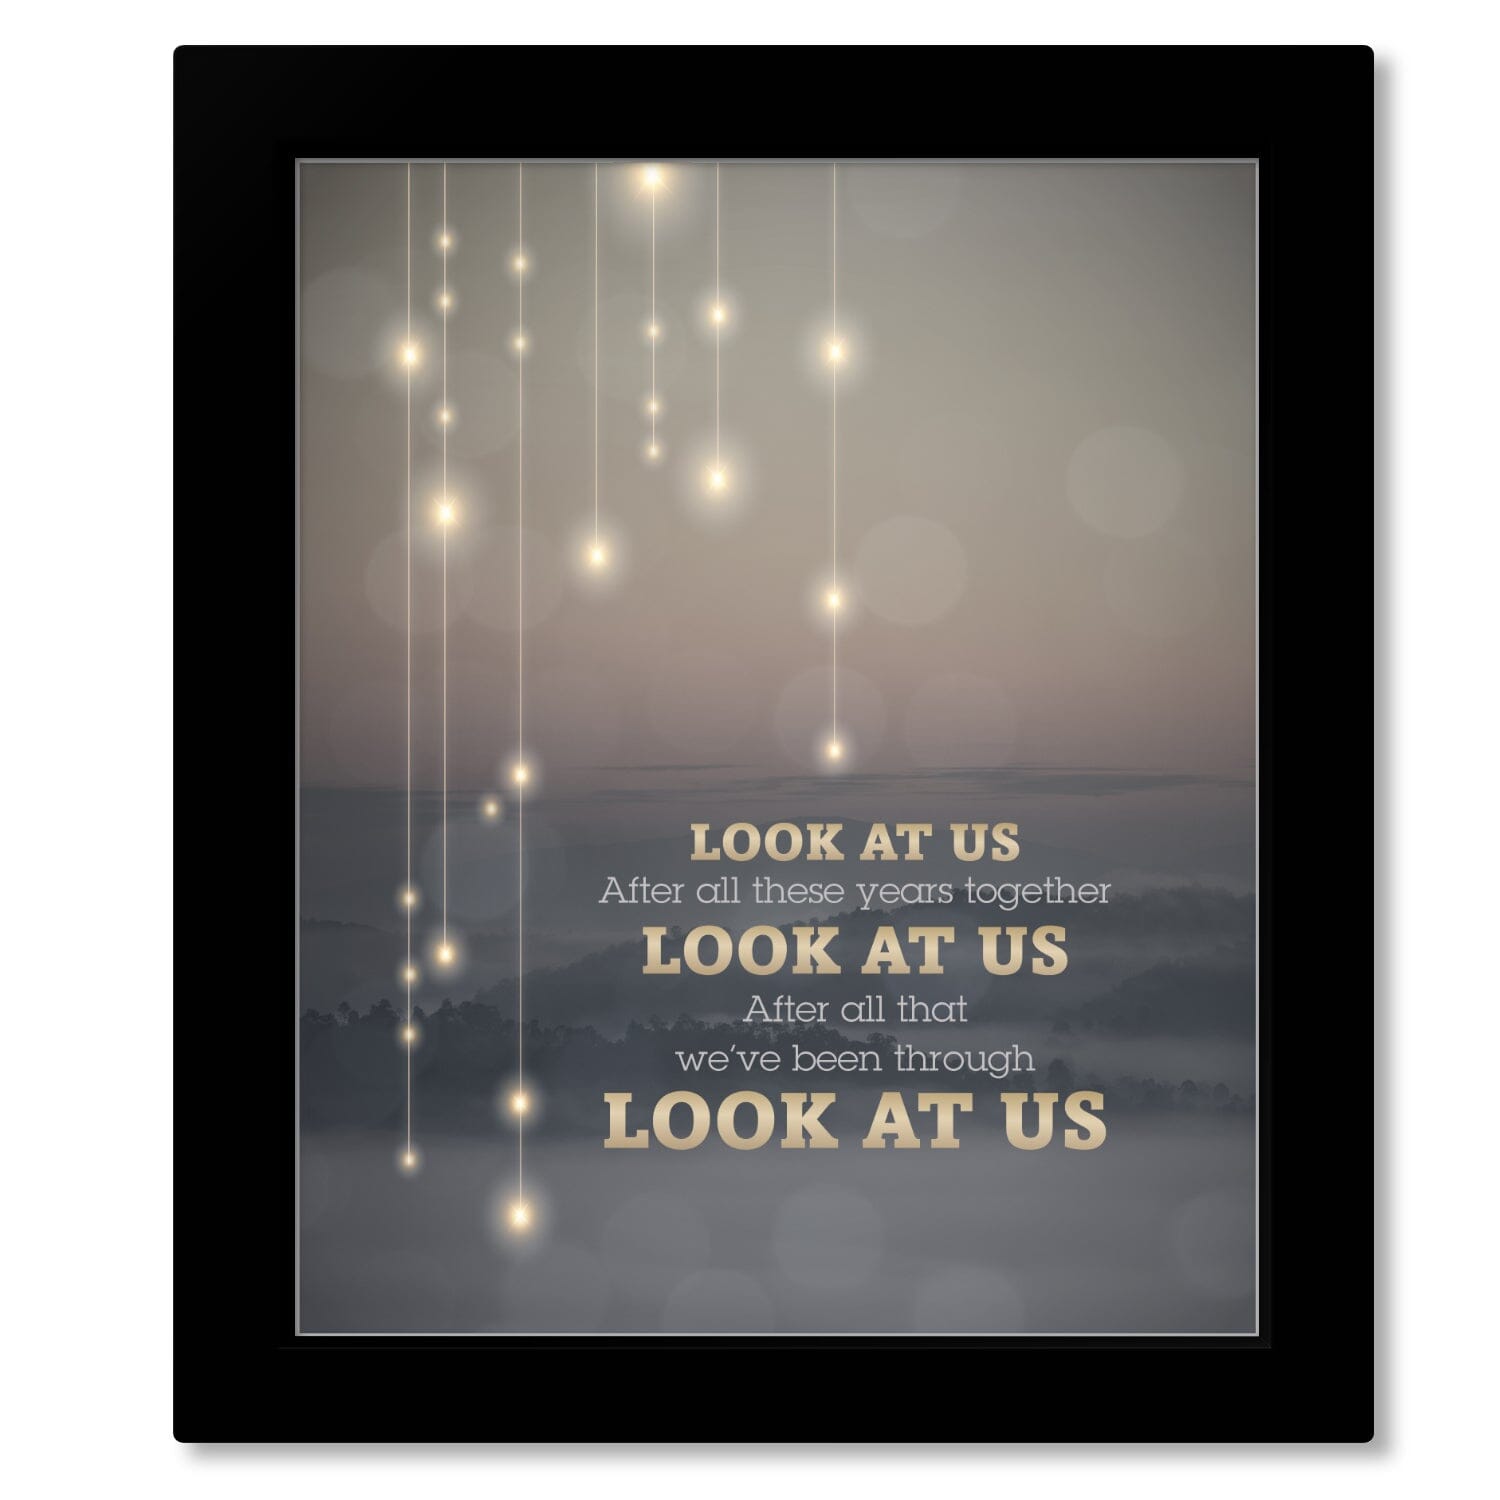 Look at Us by Vince Gill - Pop Country Song Art Song Lyrics Art Song Lyrics Art 8x10 Framed Print without Mat 